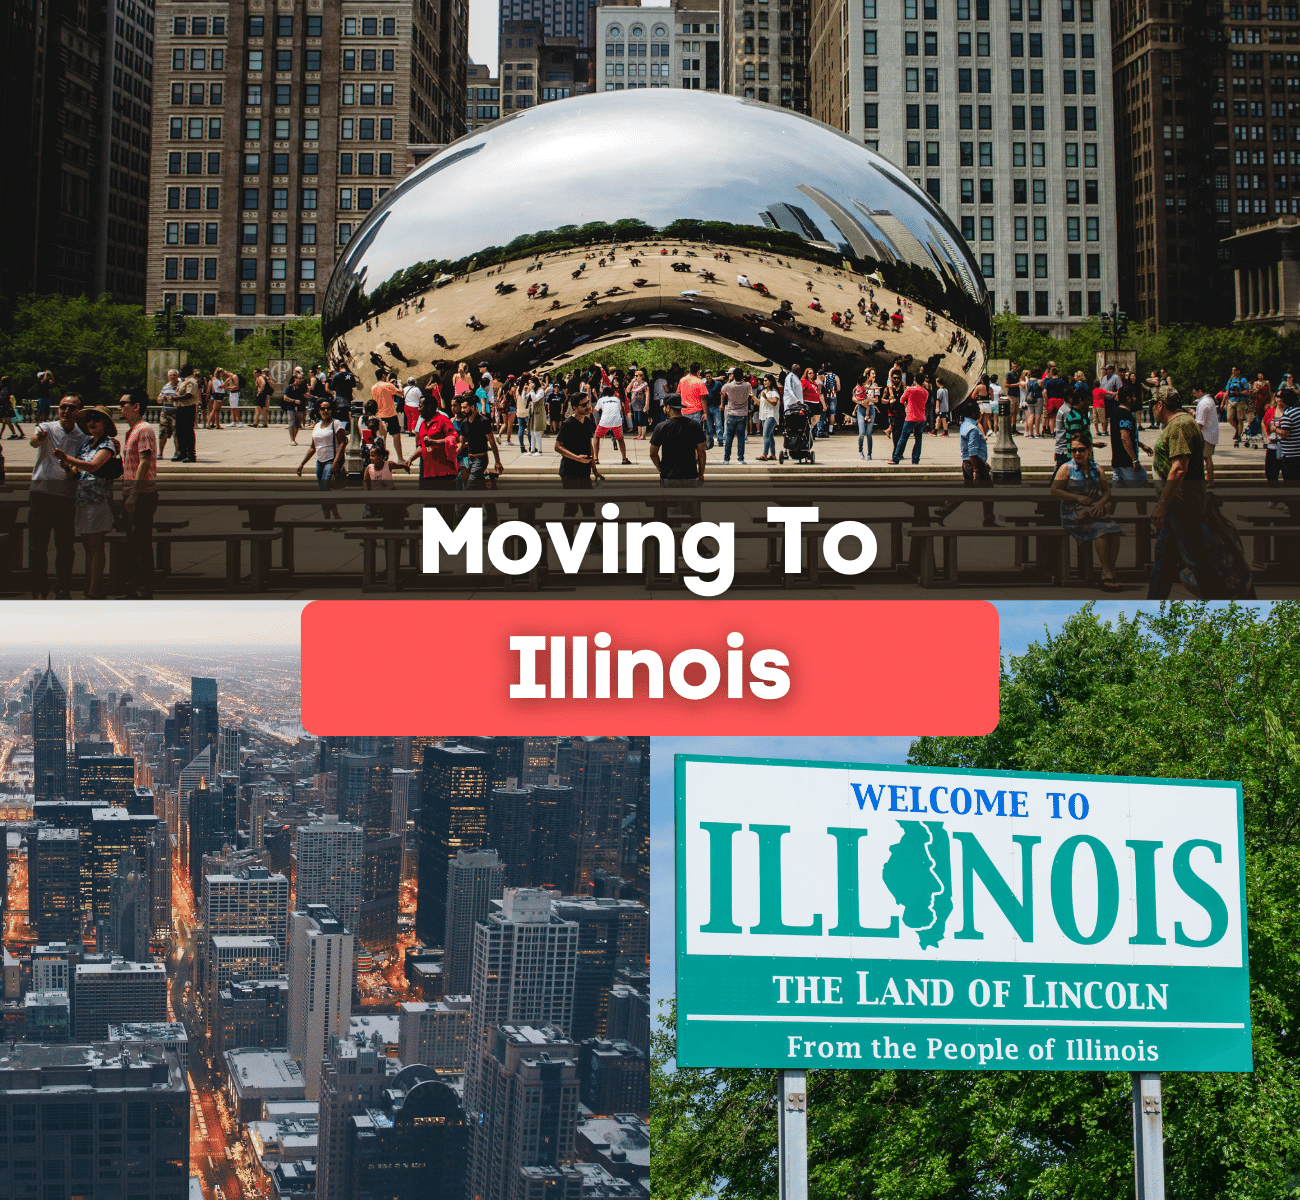 Moving to Illinois - Here's what it's like living in the state of Illinois